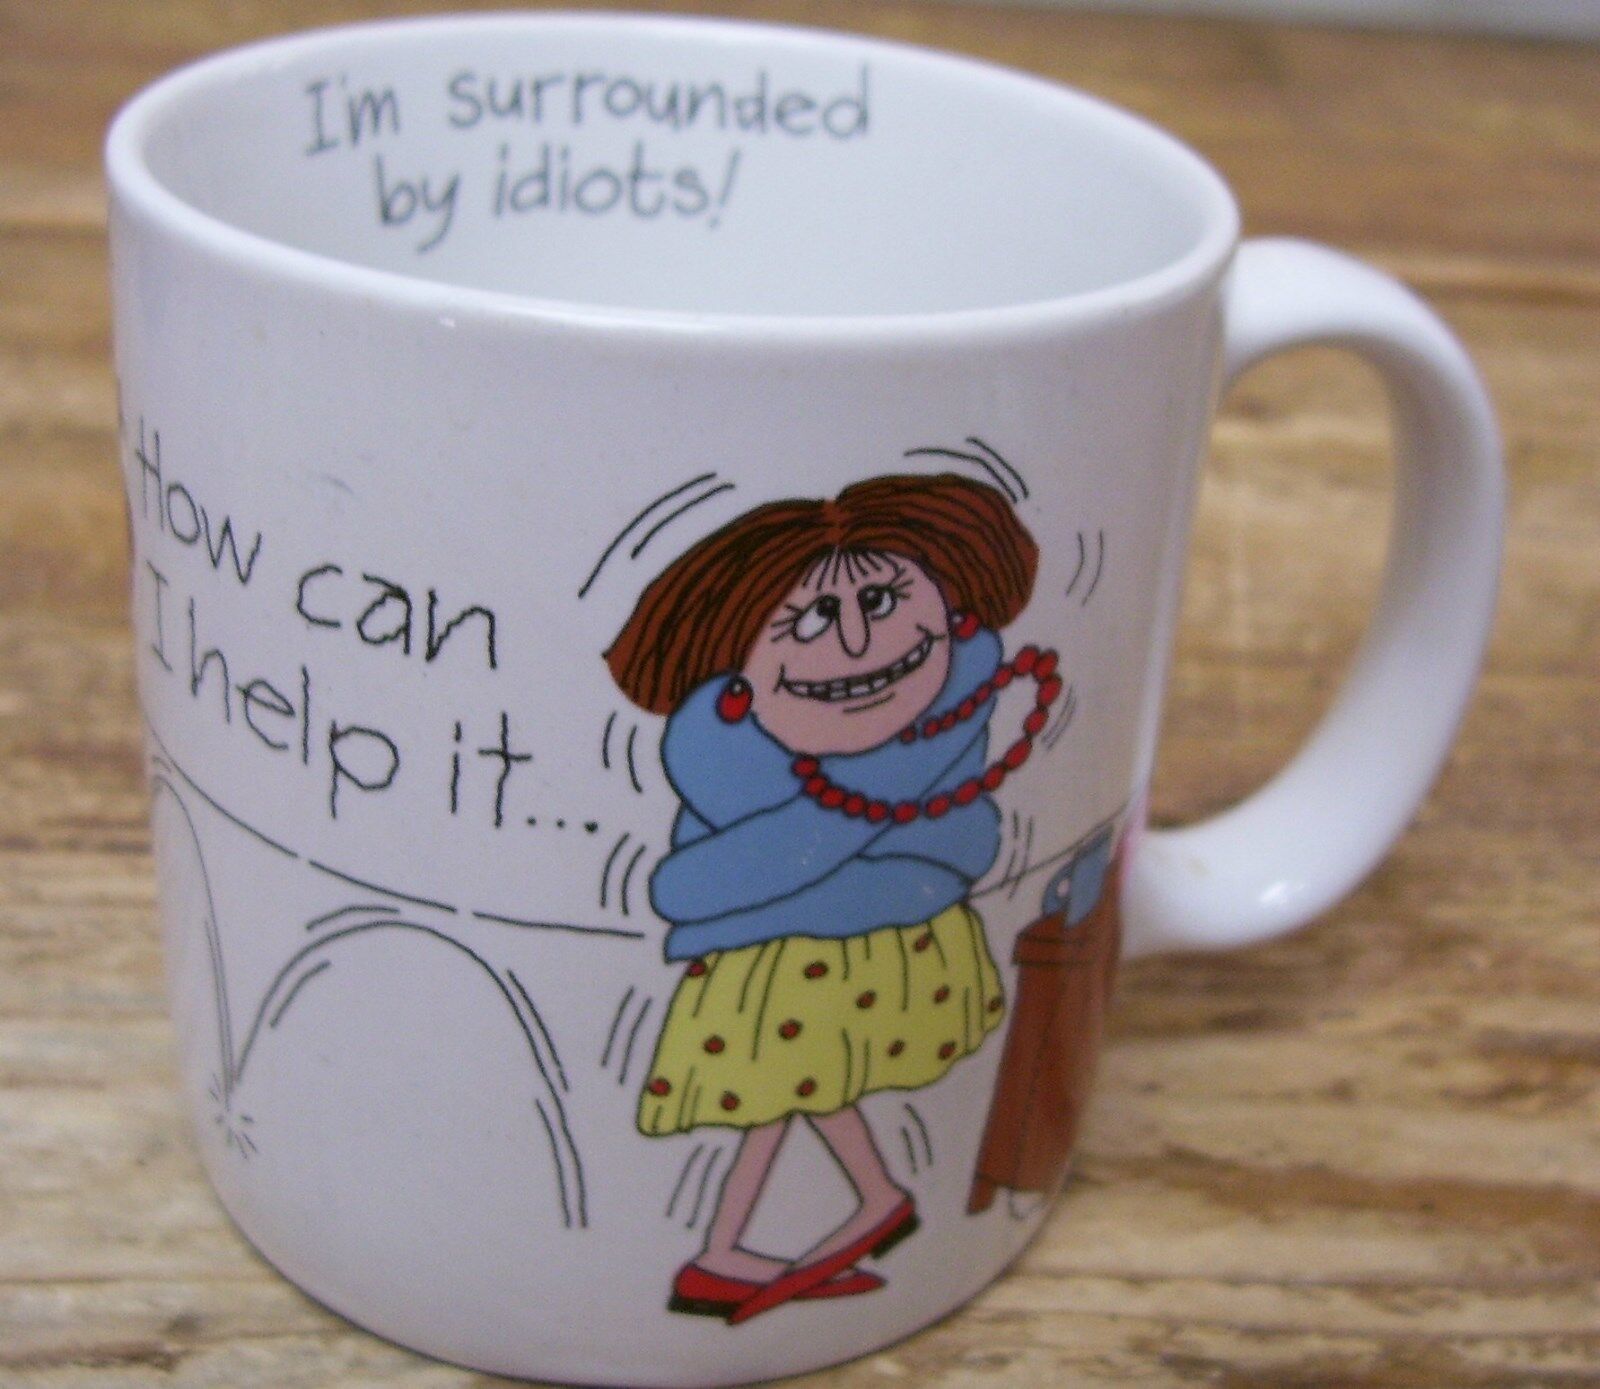 Woman Frustrated Office Coffee Mug Cup Surrounded by Idiots RUSS 